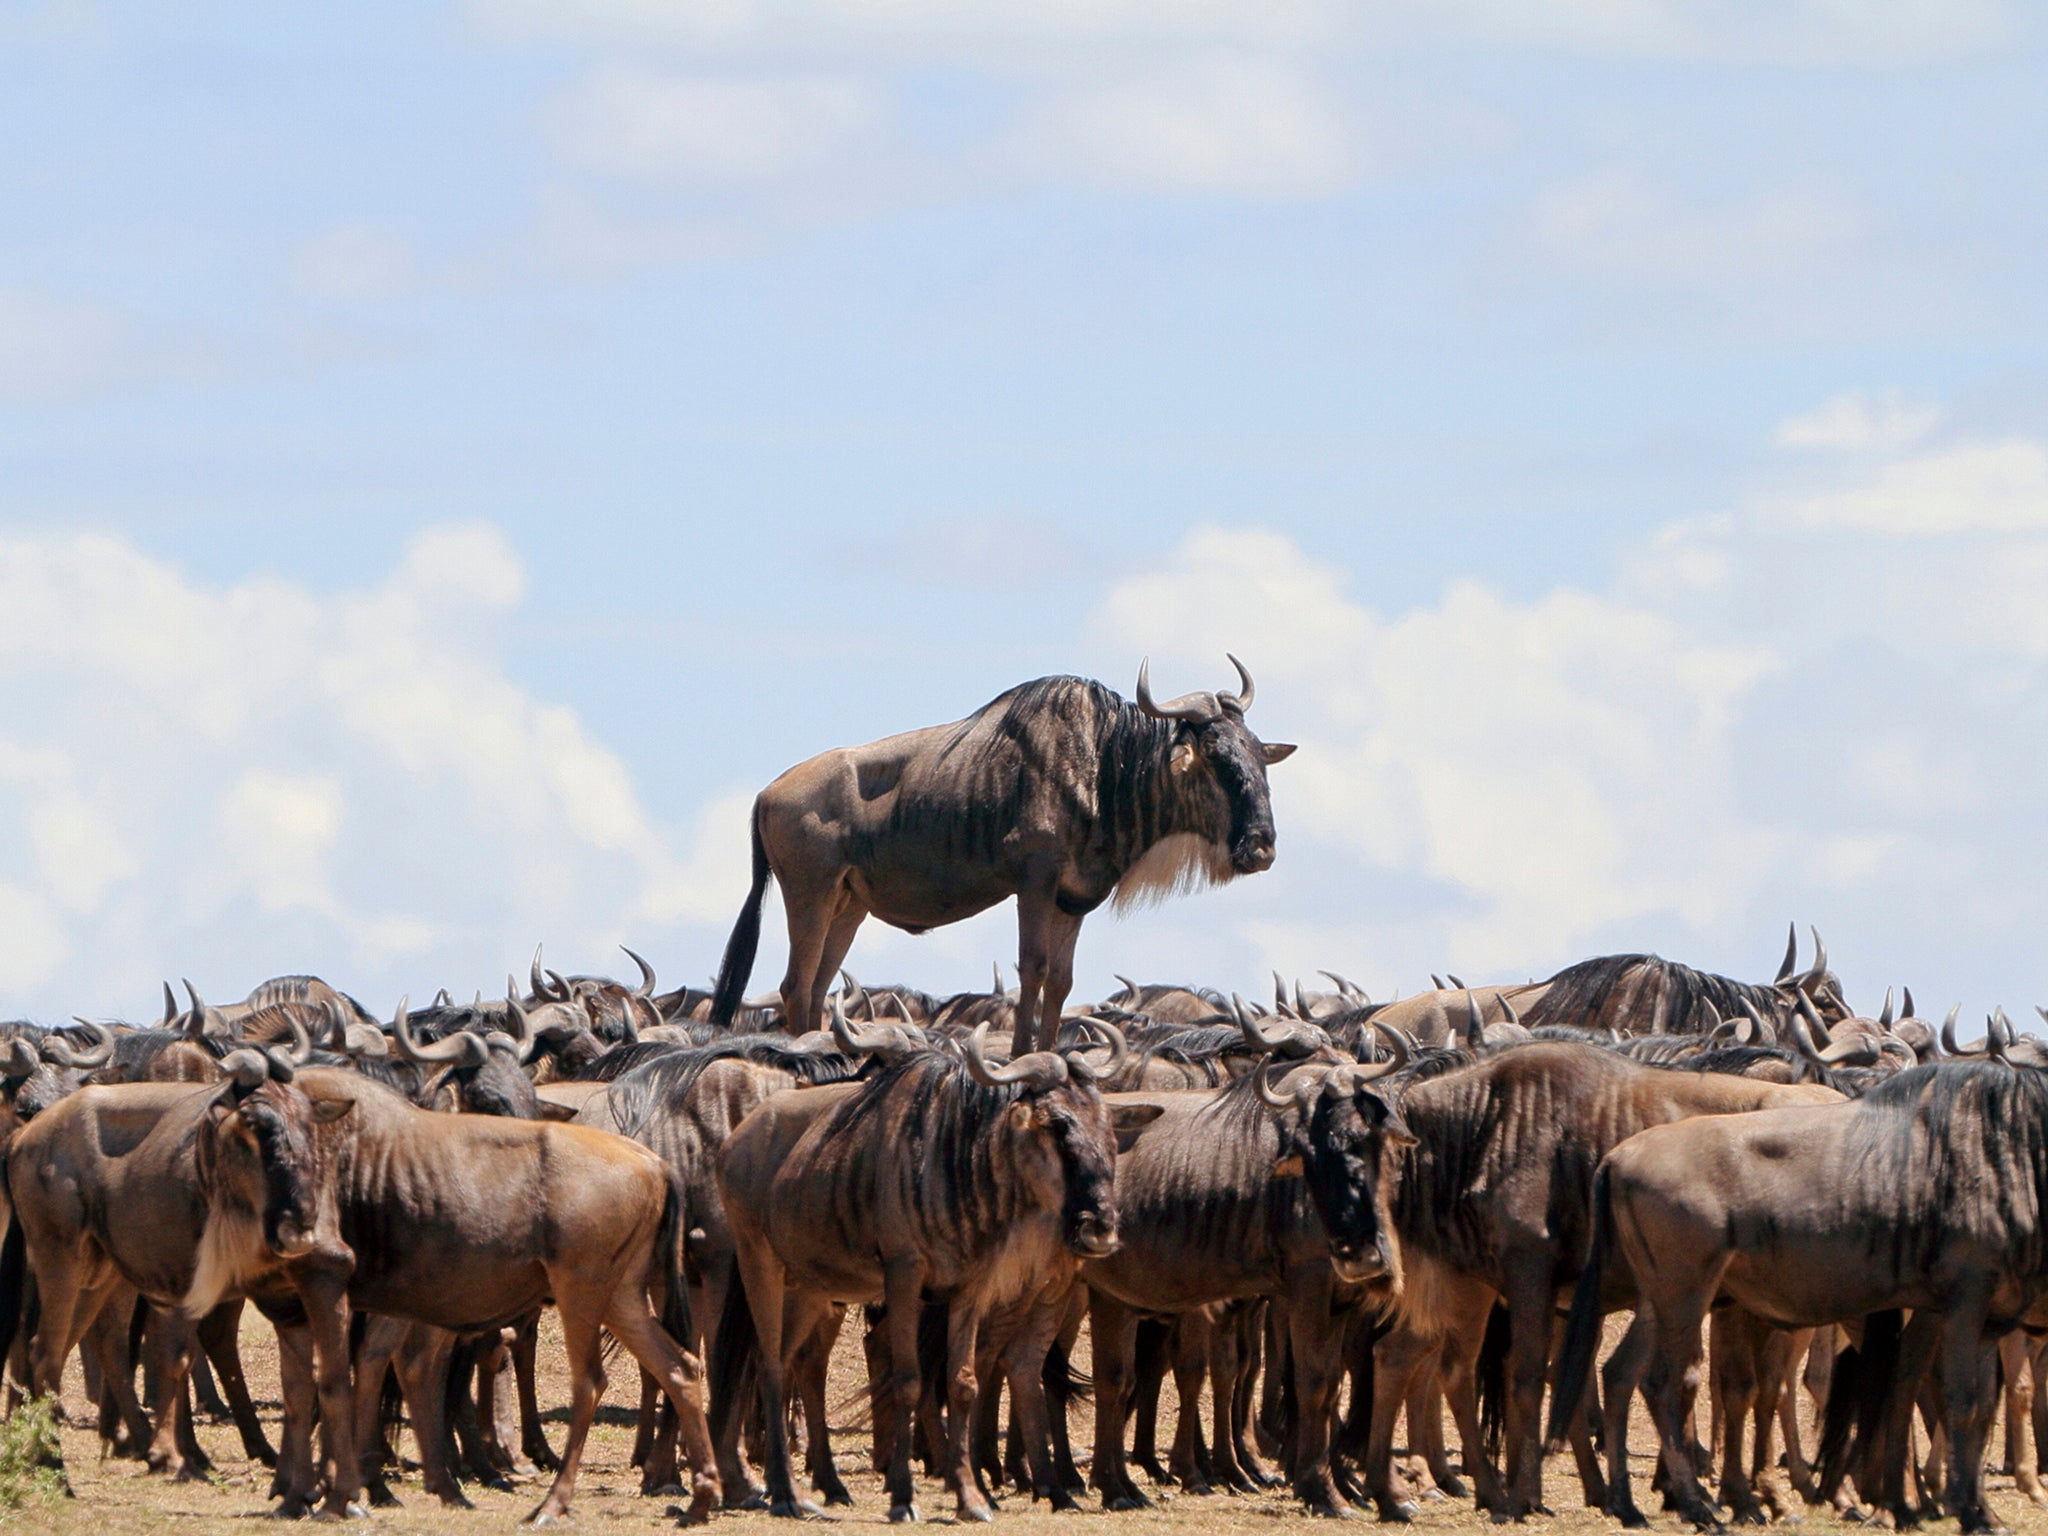 Jean-Jacques Alcalay was highly commended for his snap of a blue wildebeest appearing to ride a wave of hundreds of other wildebeest in Masai Mara, Kenya (Jean-Jacques Alcalay/ Barcroft )